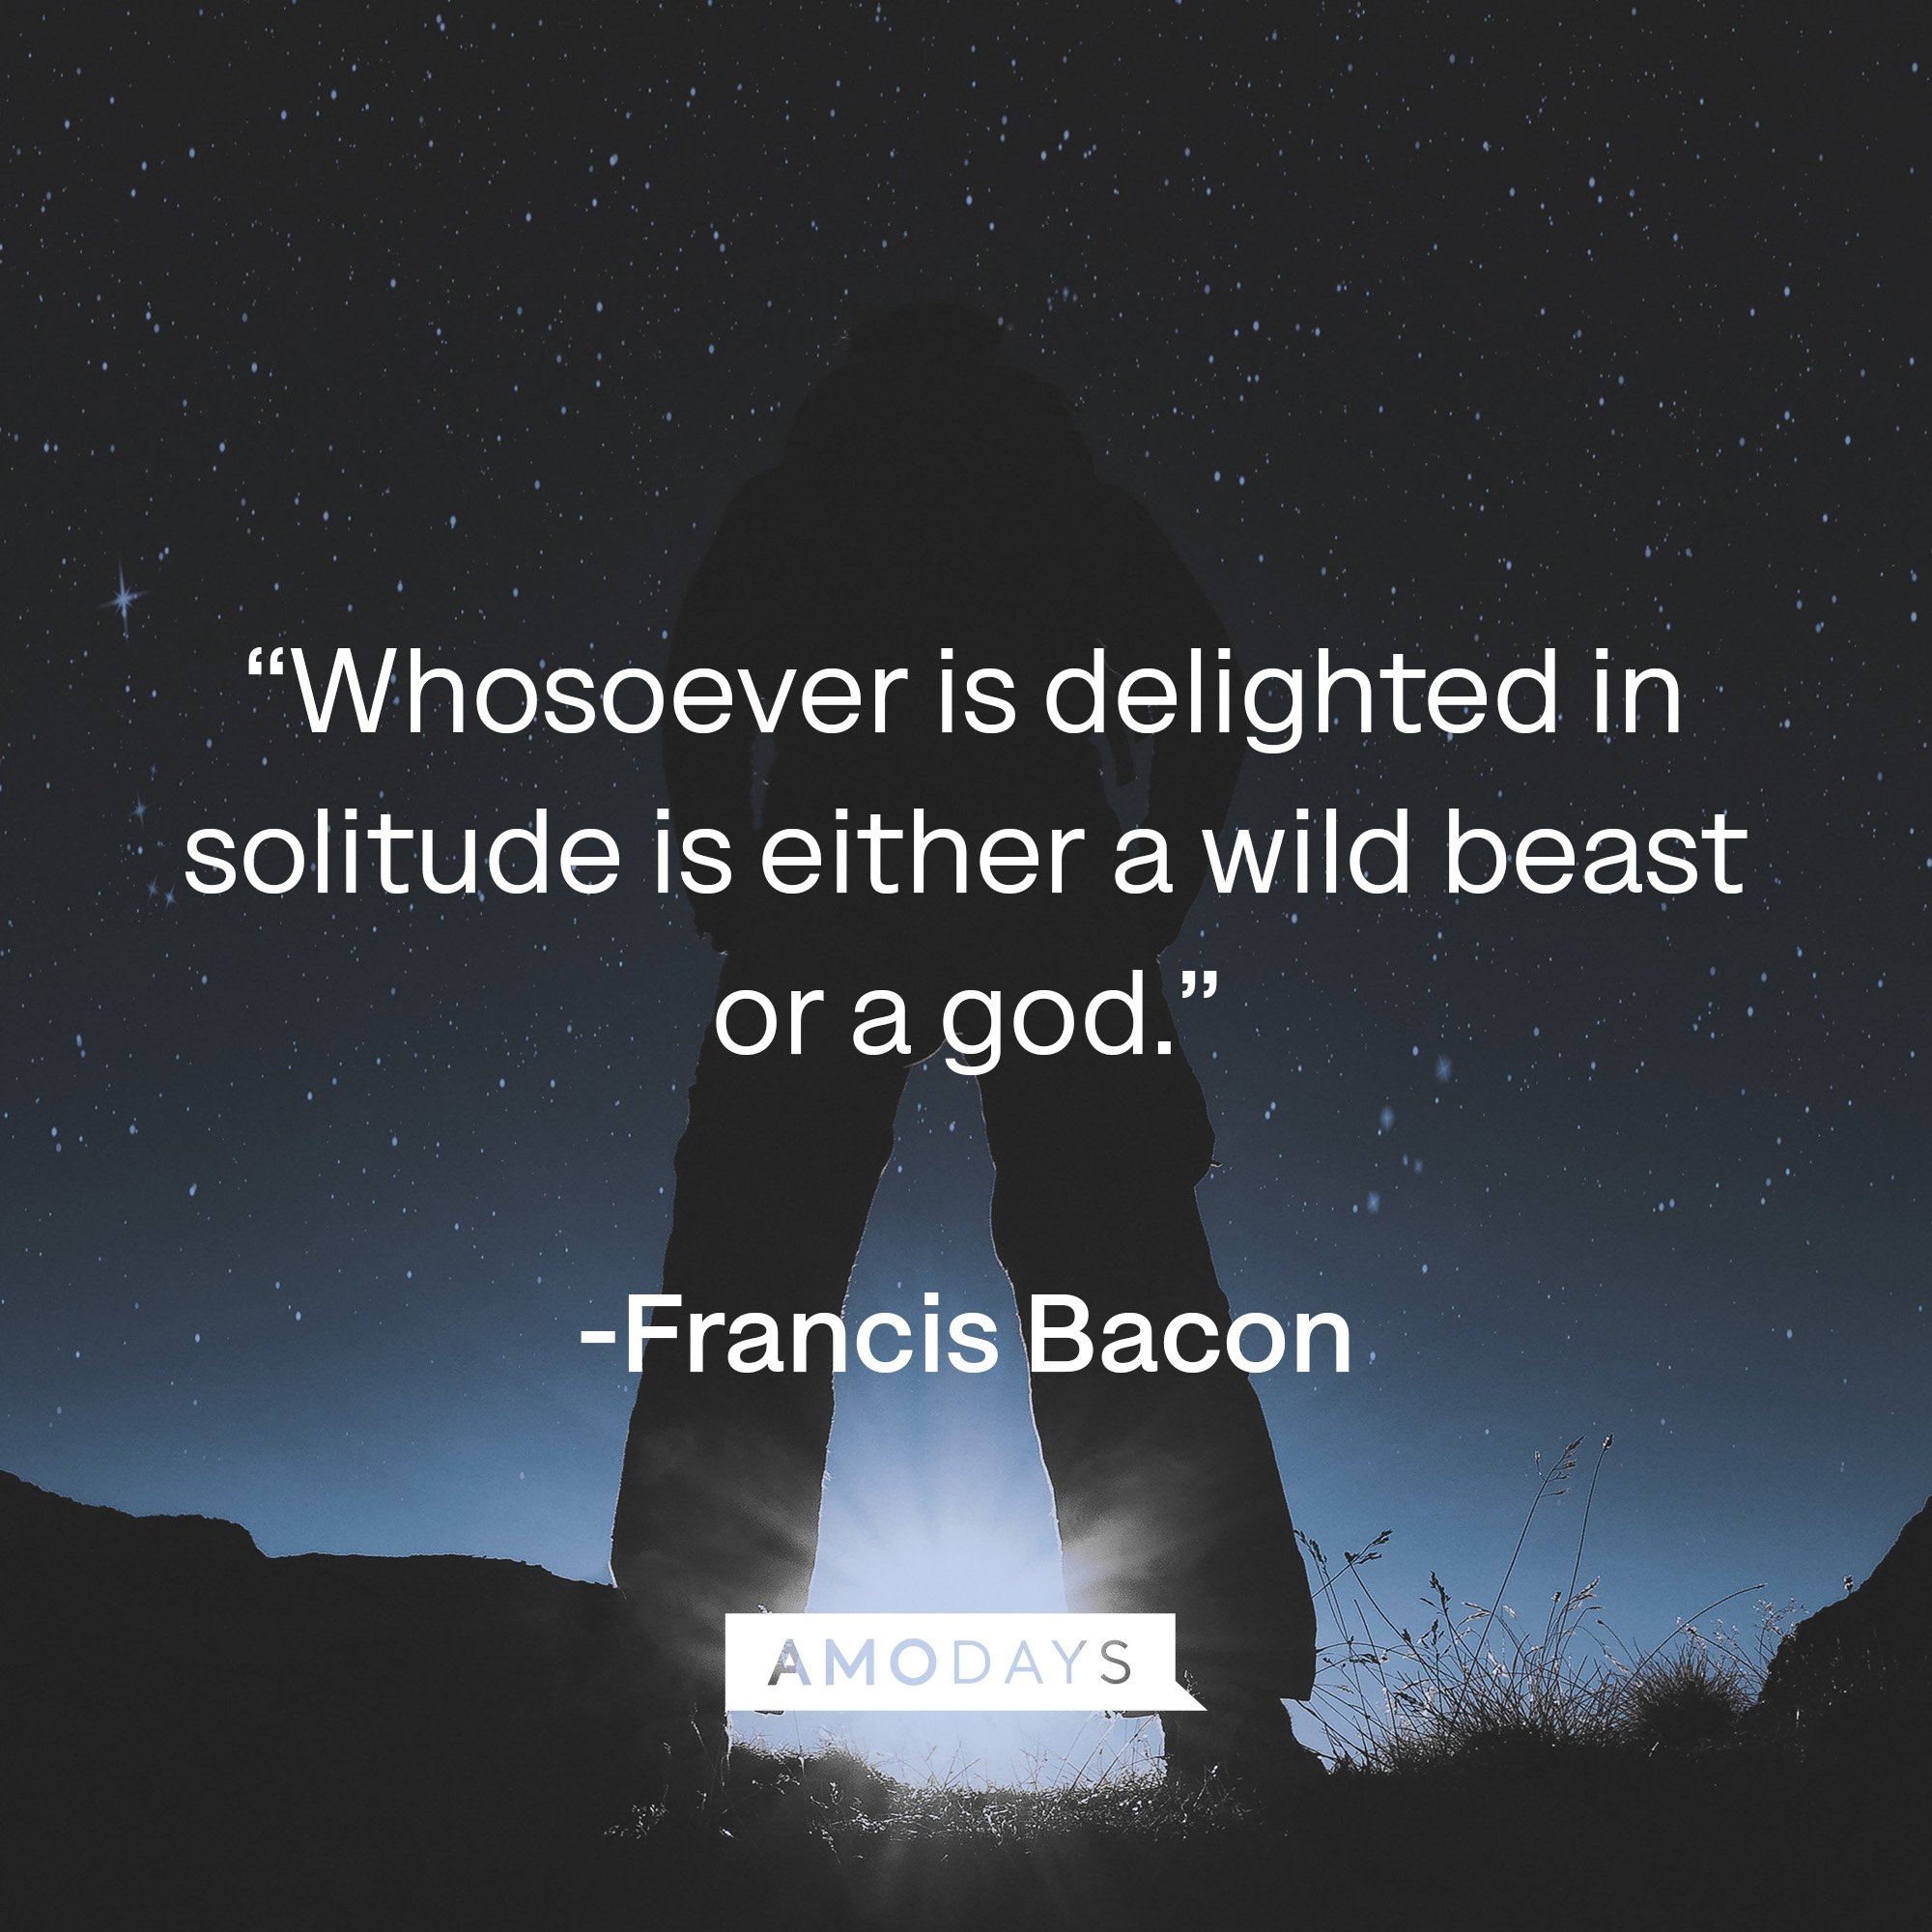 Francis Bacon’s quote: “Whosoever is delighted in solitude is either a wild beast or a god.” | Image: Amodays 